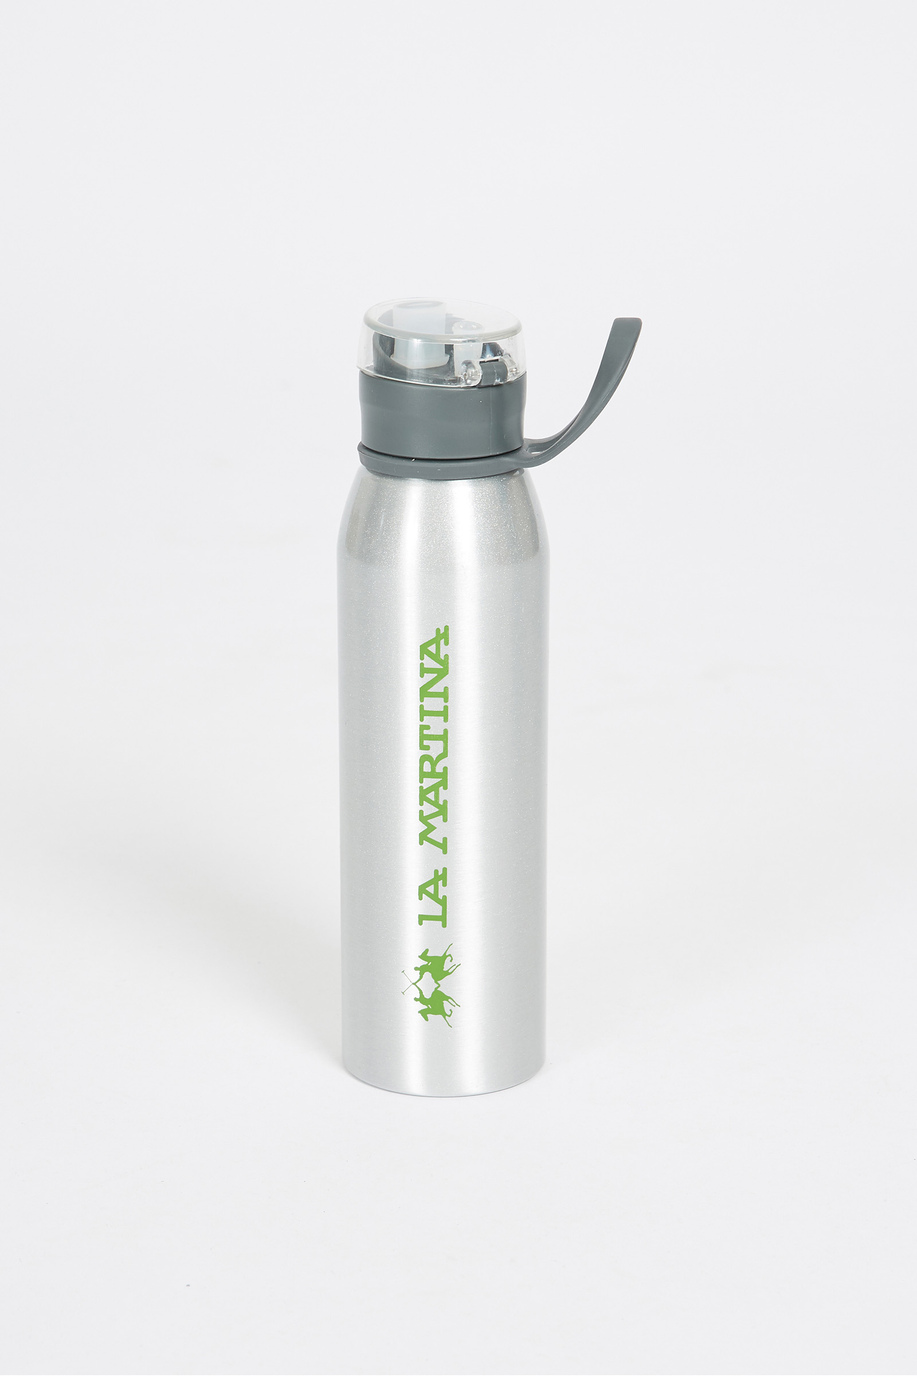 Unisex aluminium bottle with a watertight lid and logo - Accessories | La Martina - Official Online Shop